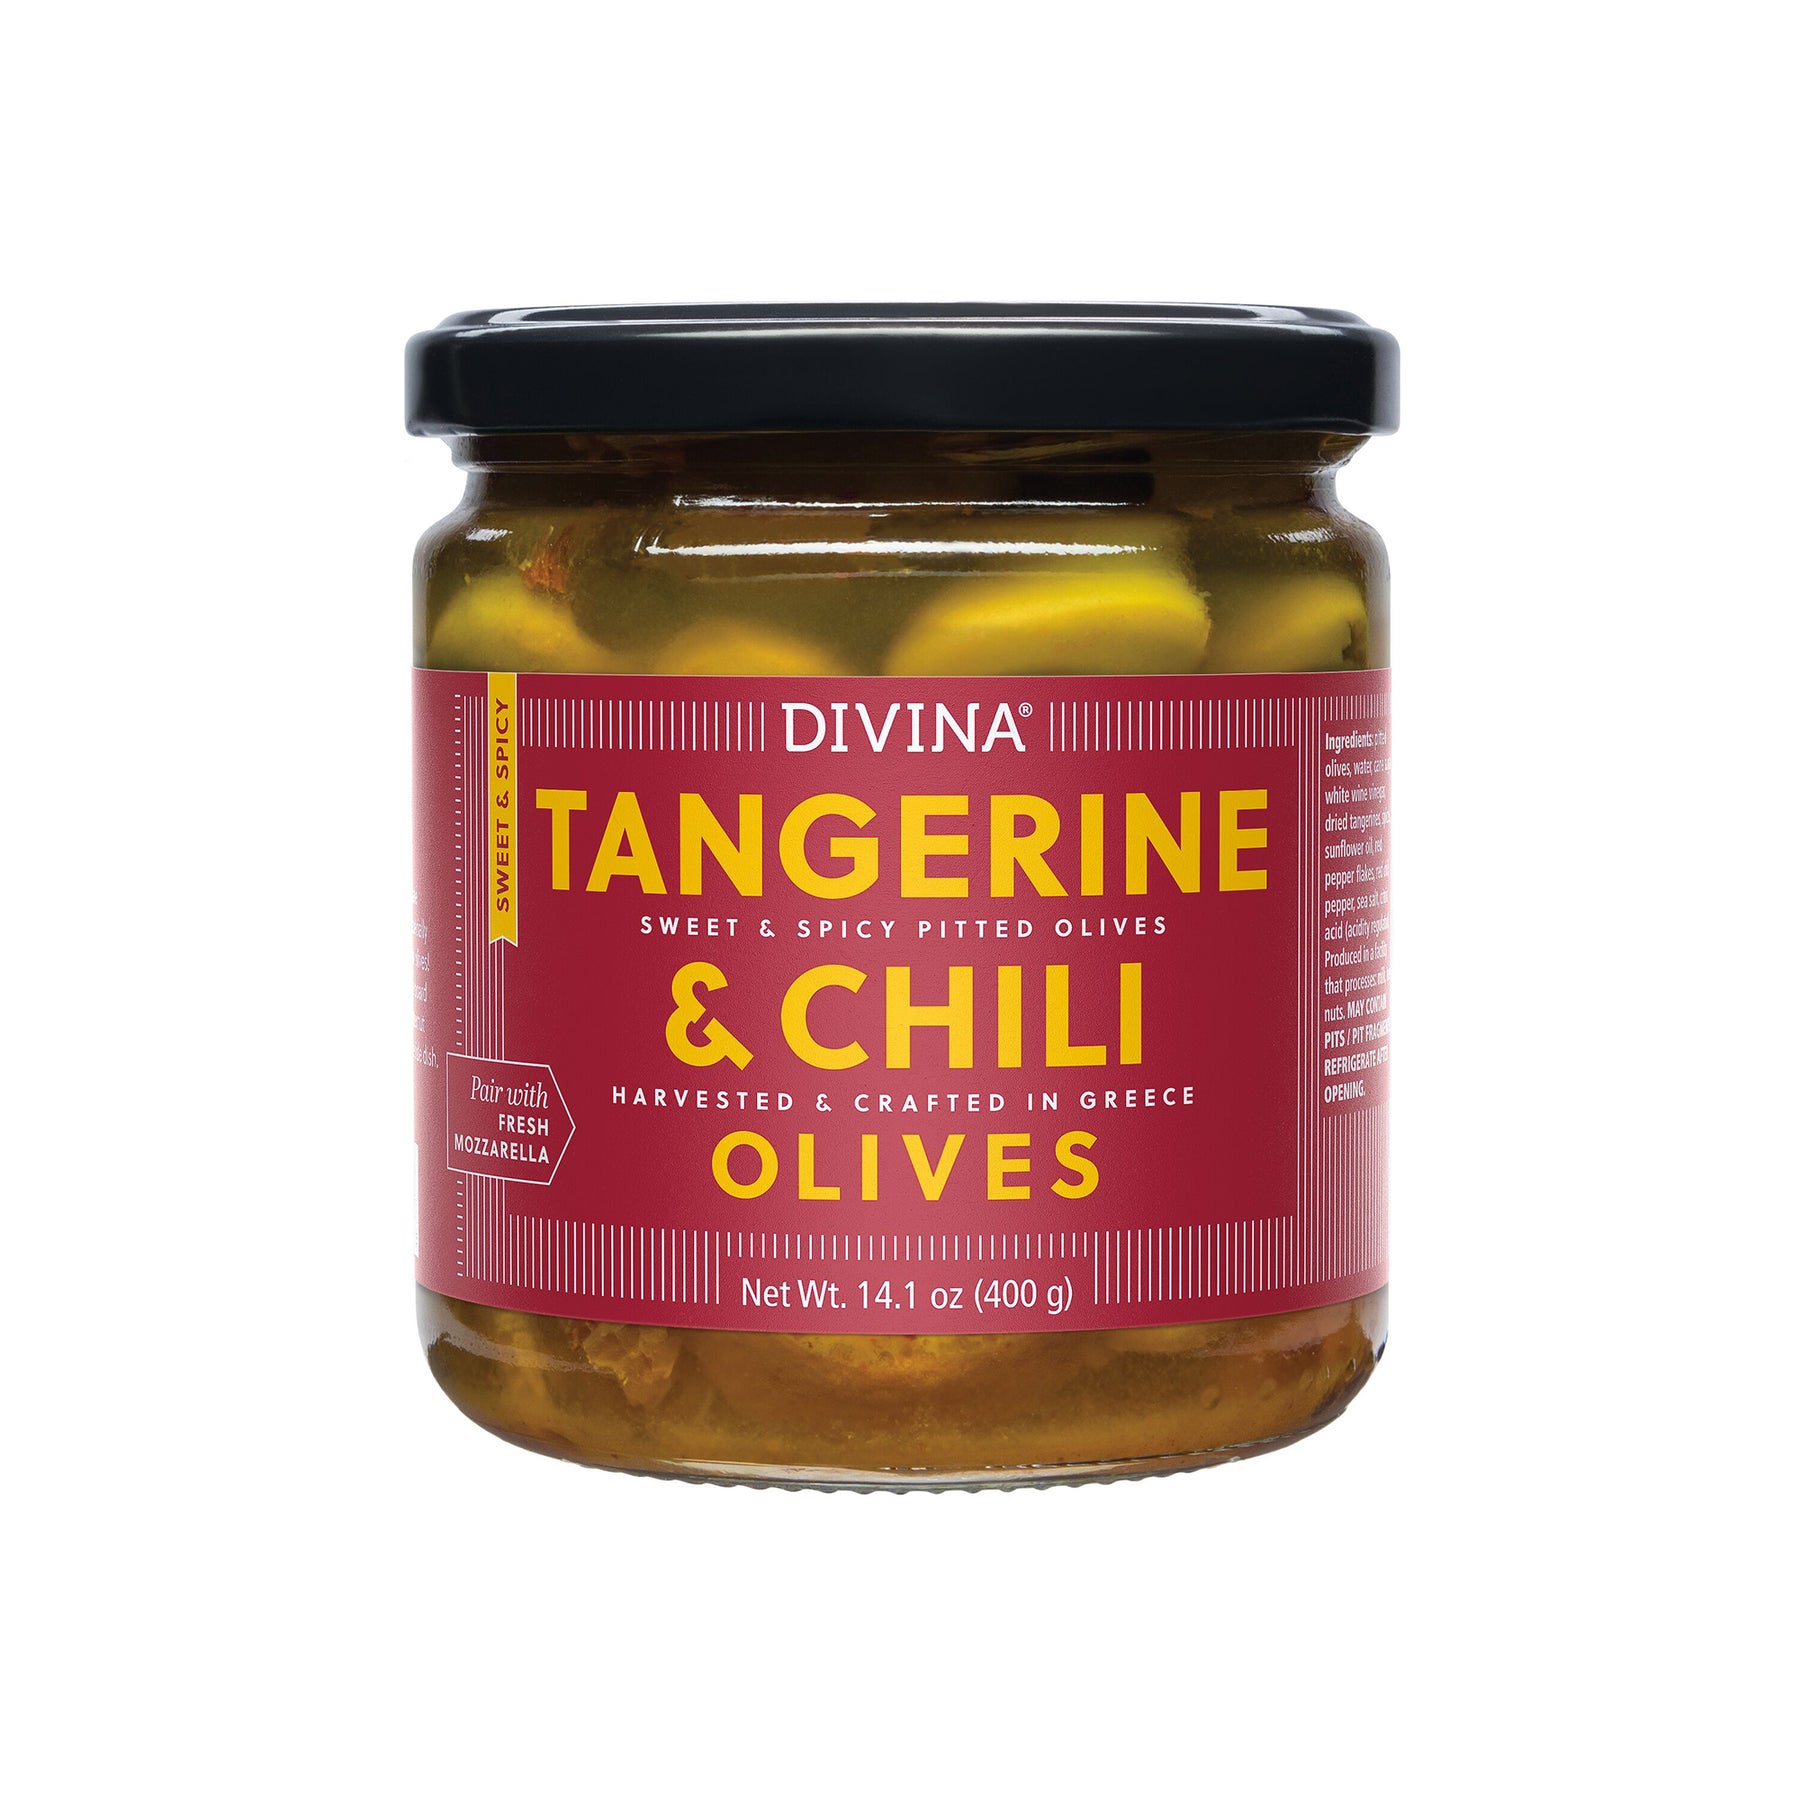 Tangerine and Chili Olives